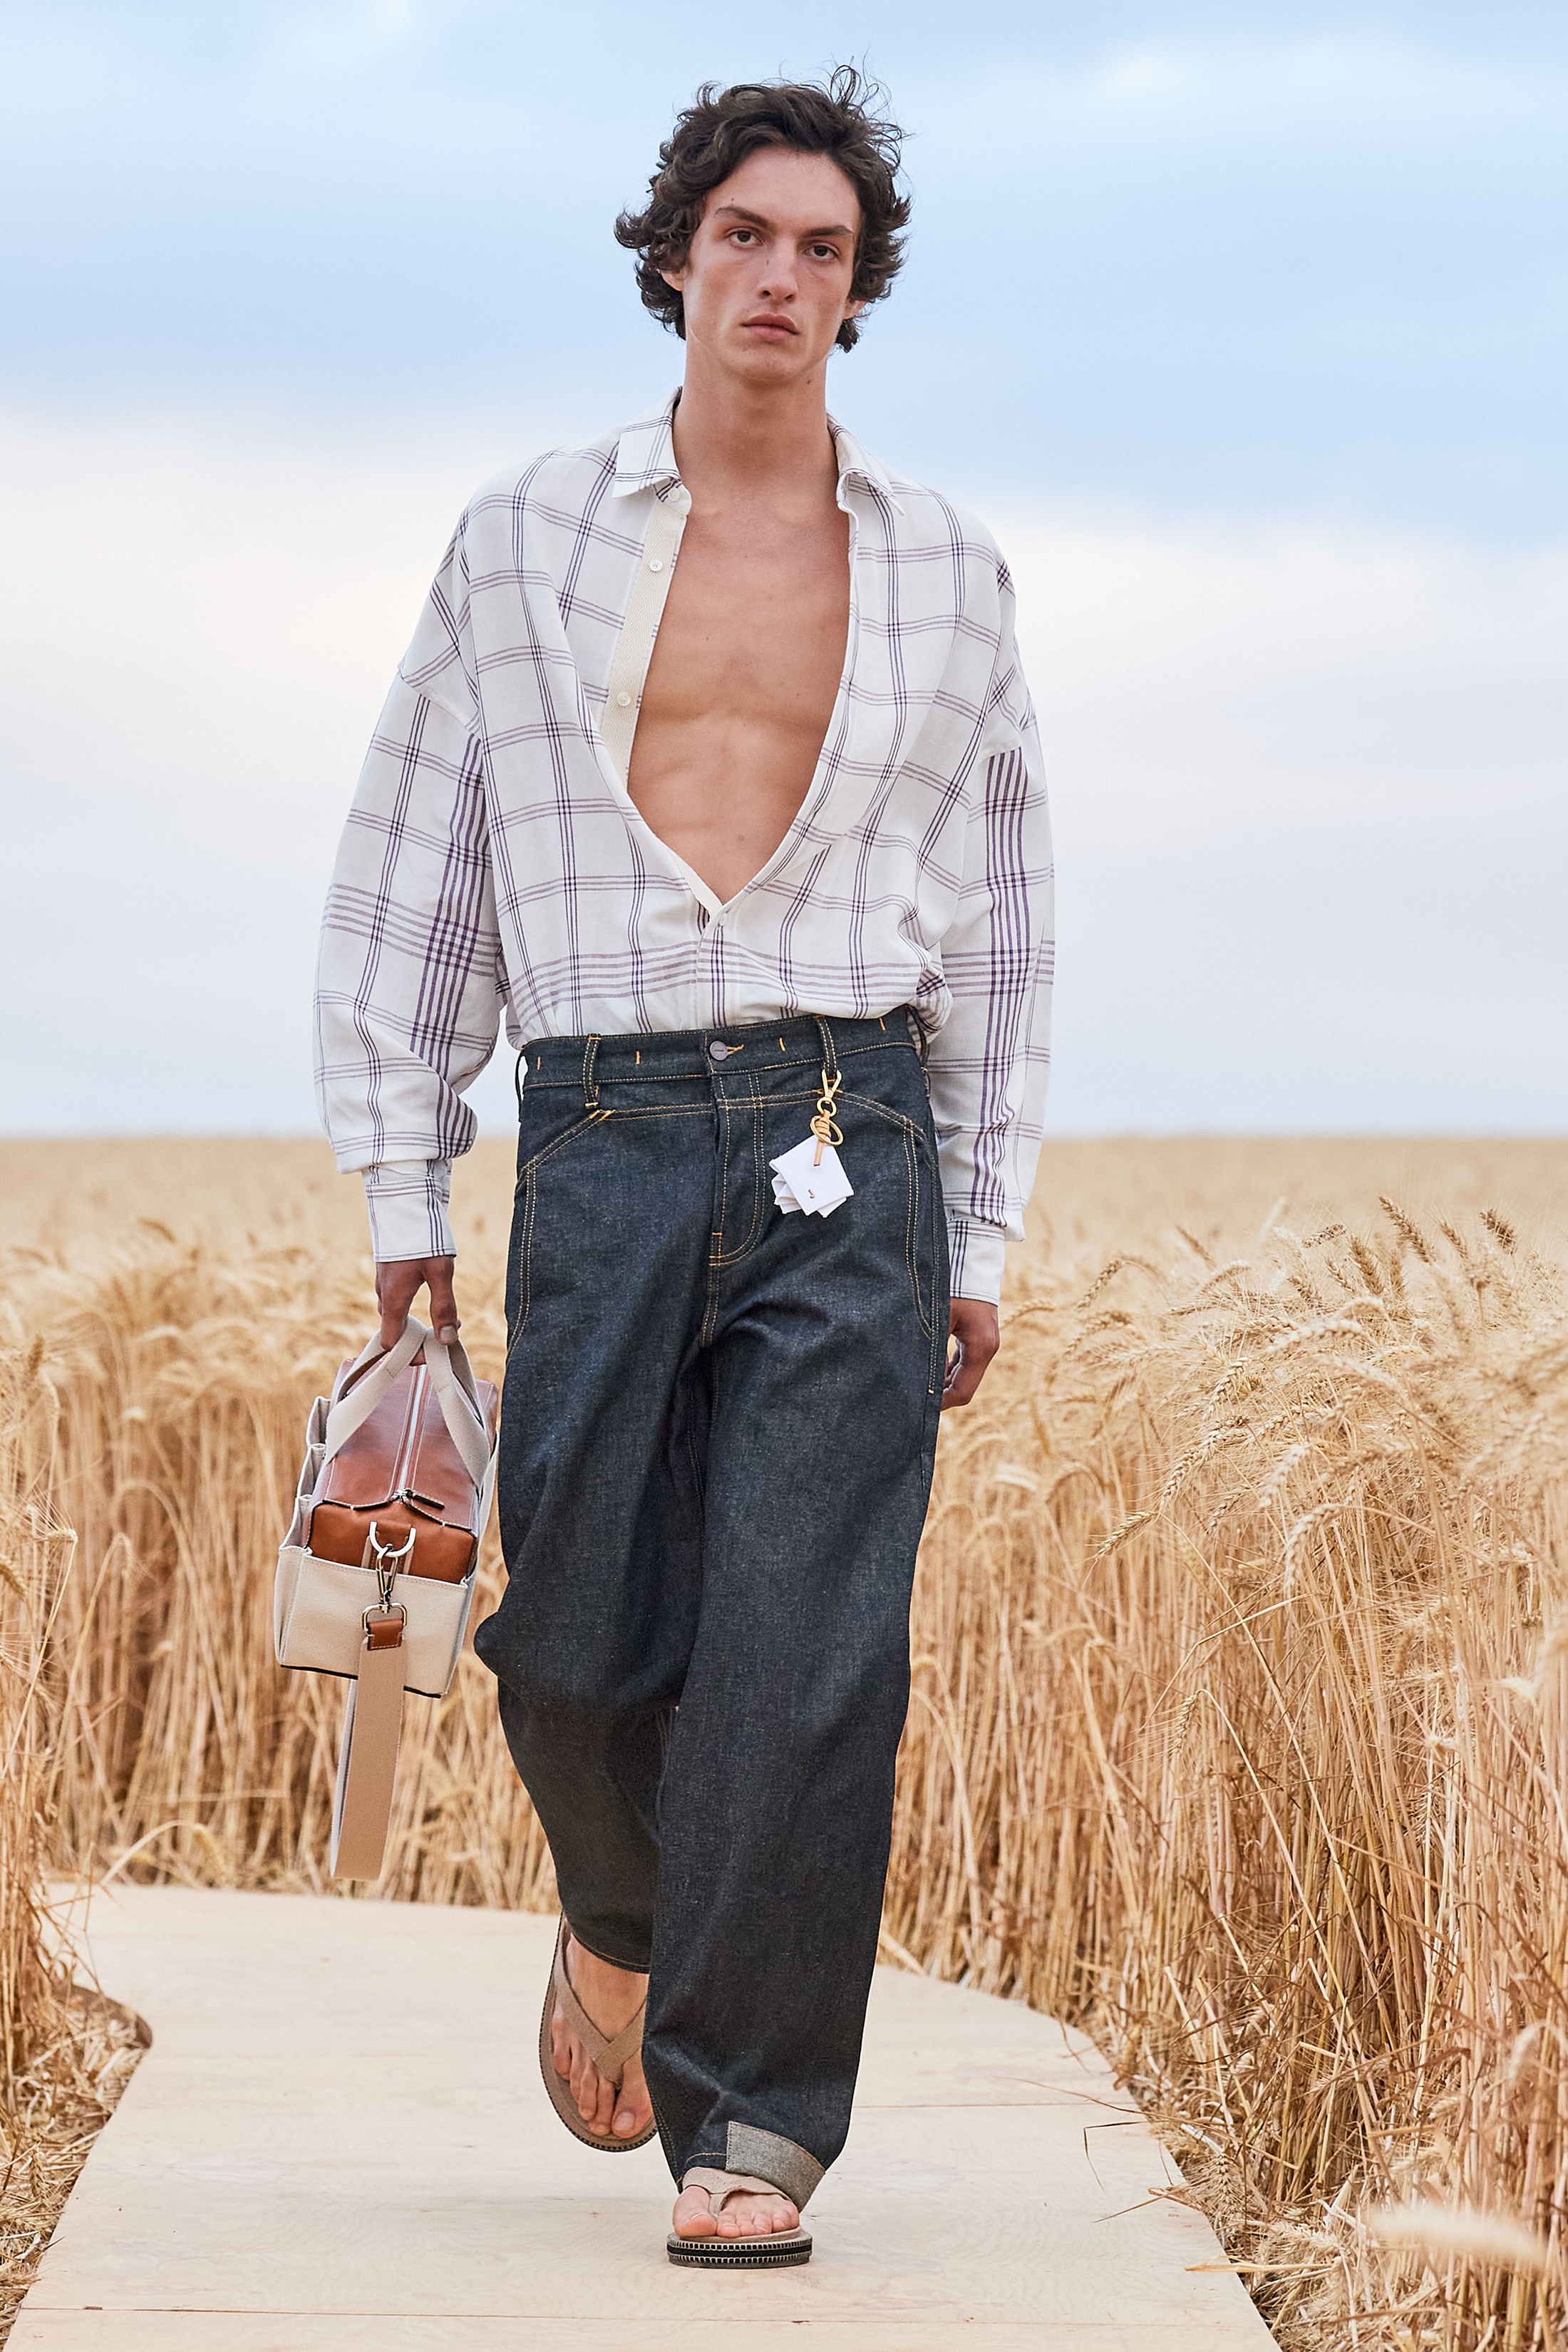 Jacquemus Debuts a Brand New Tiny Bag at Its Latest Runway Show